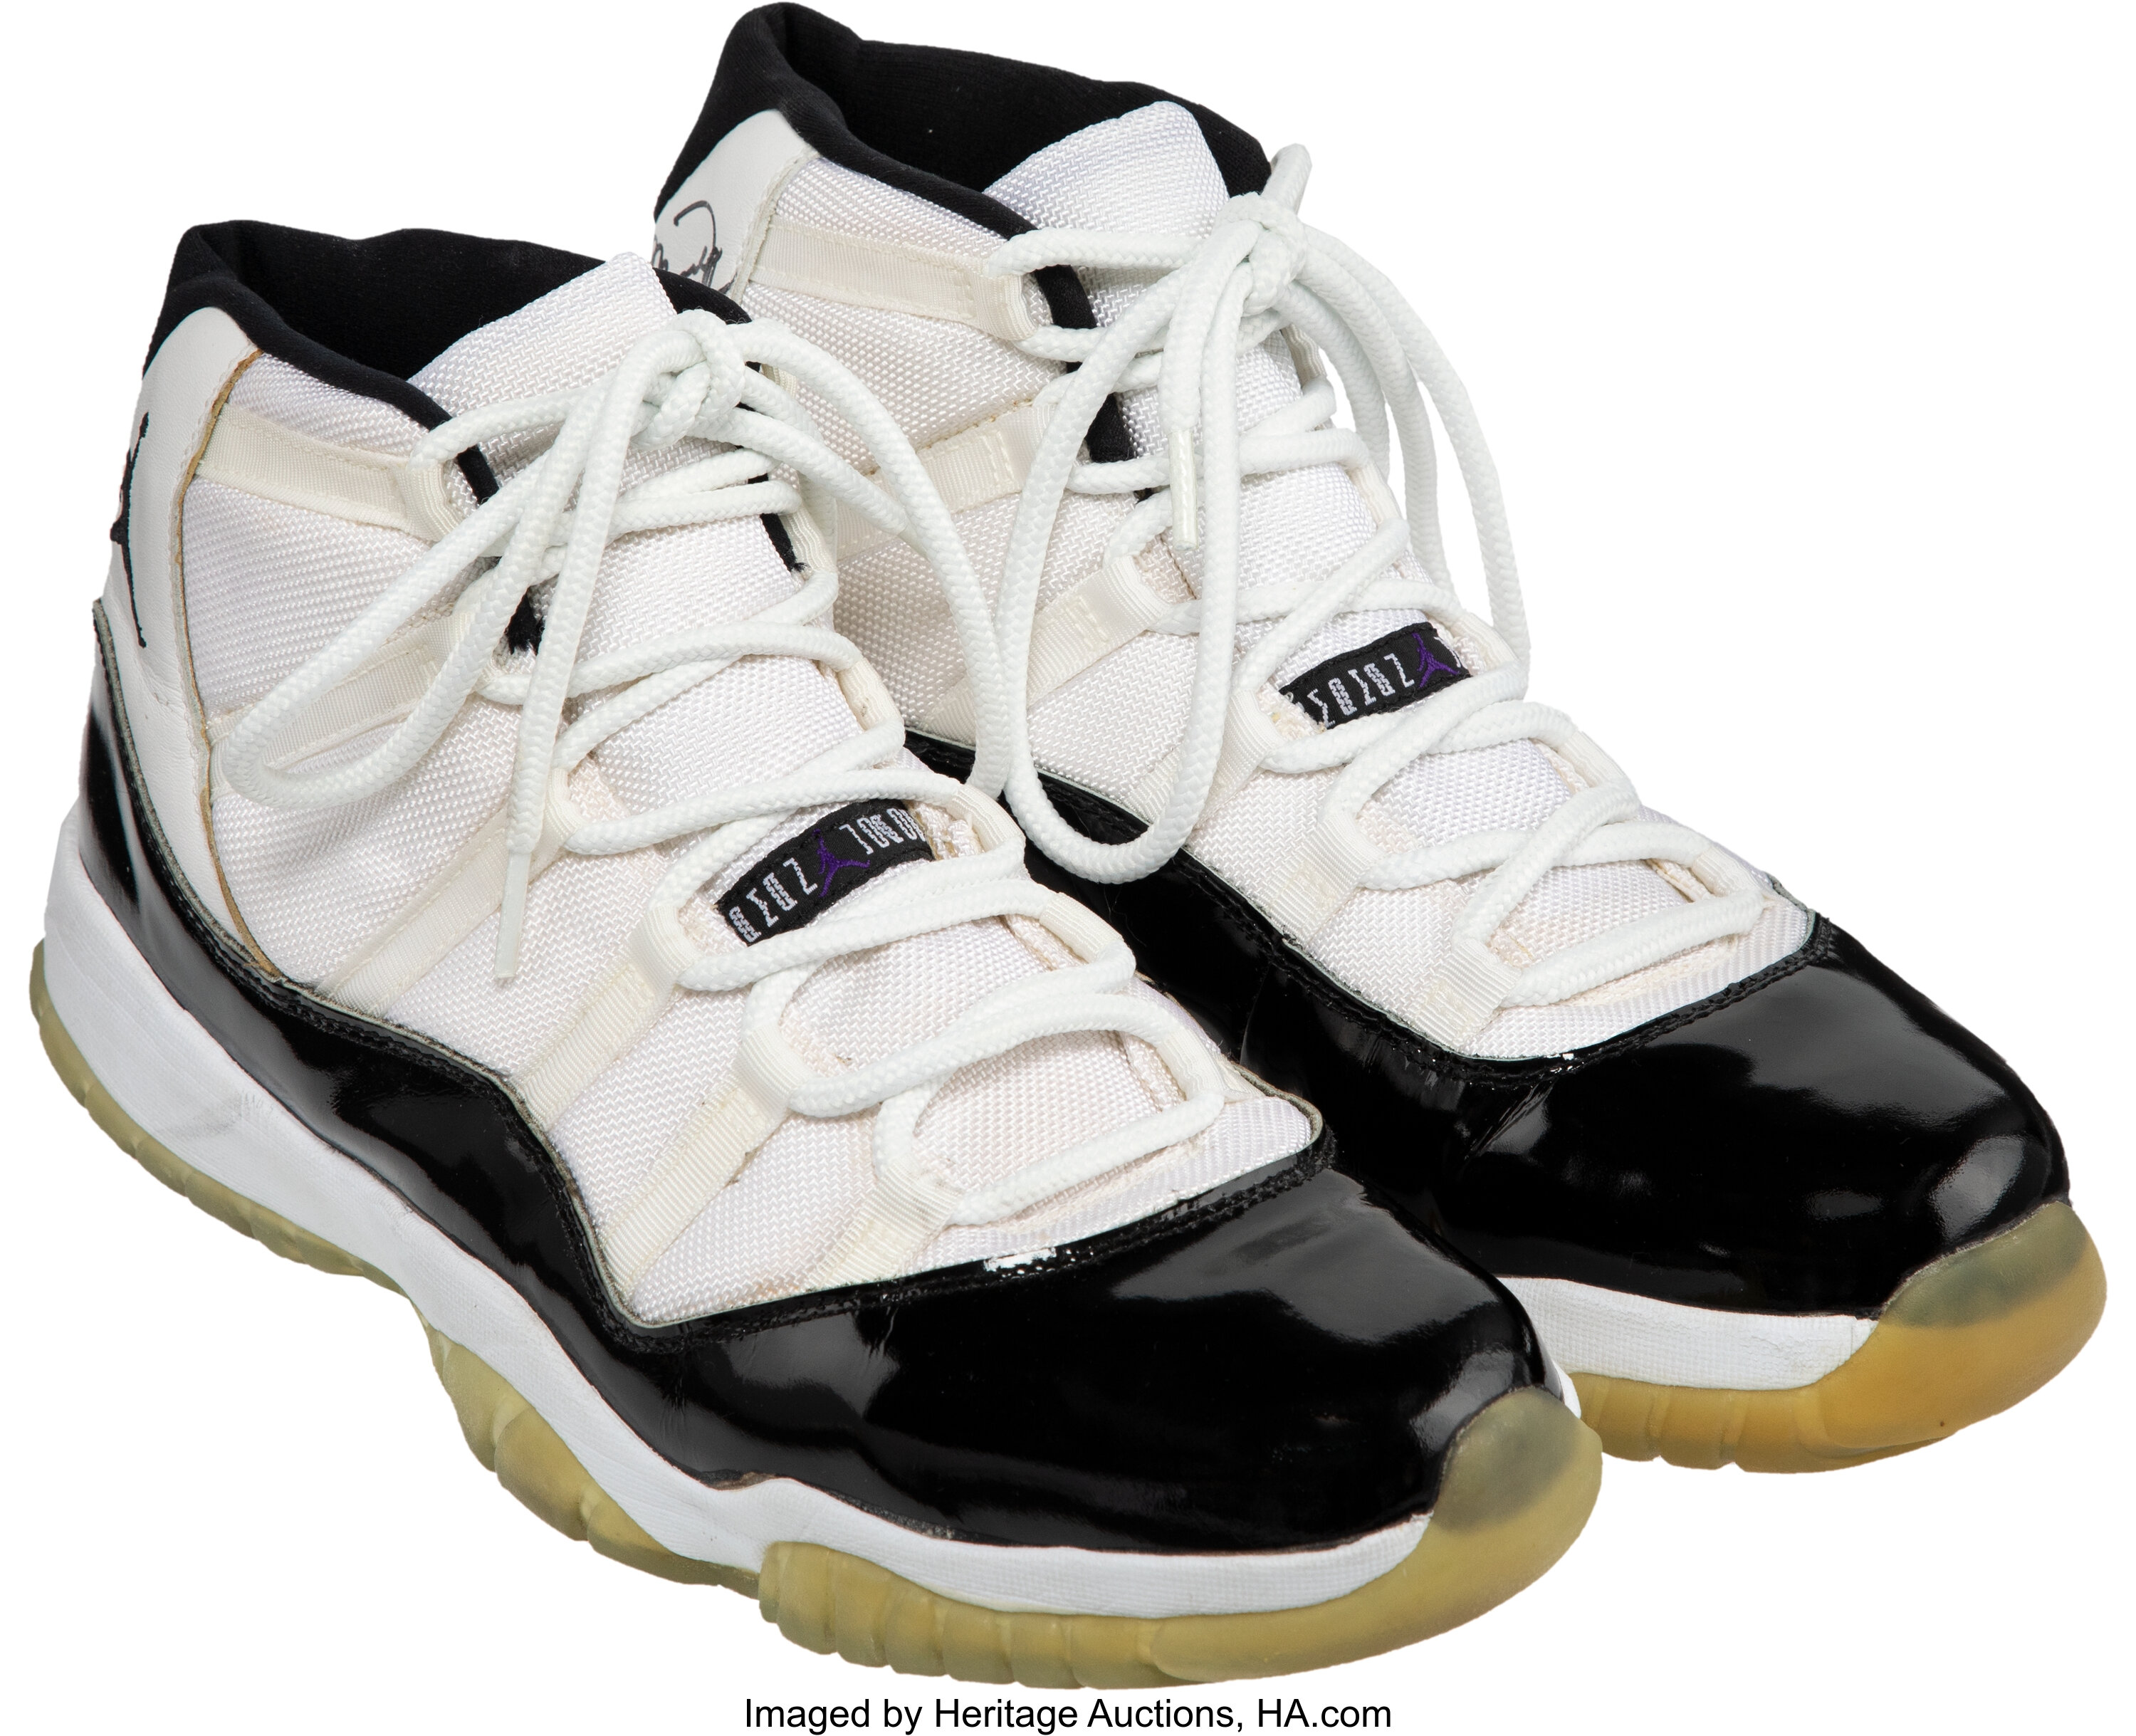 Michael Jordan's Game Used Shoes Sell For Record Price